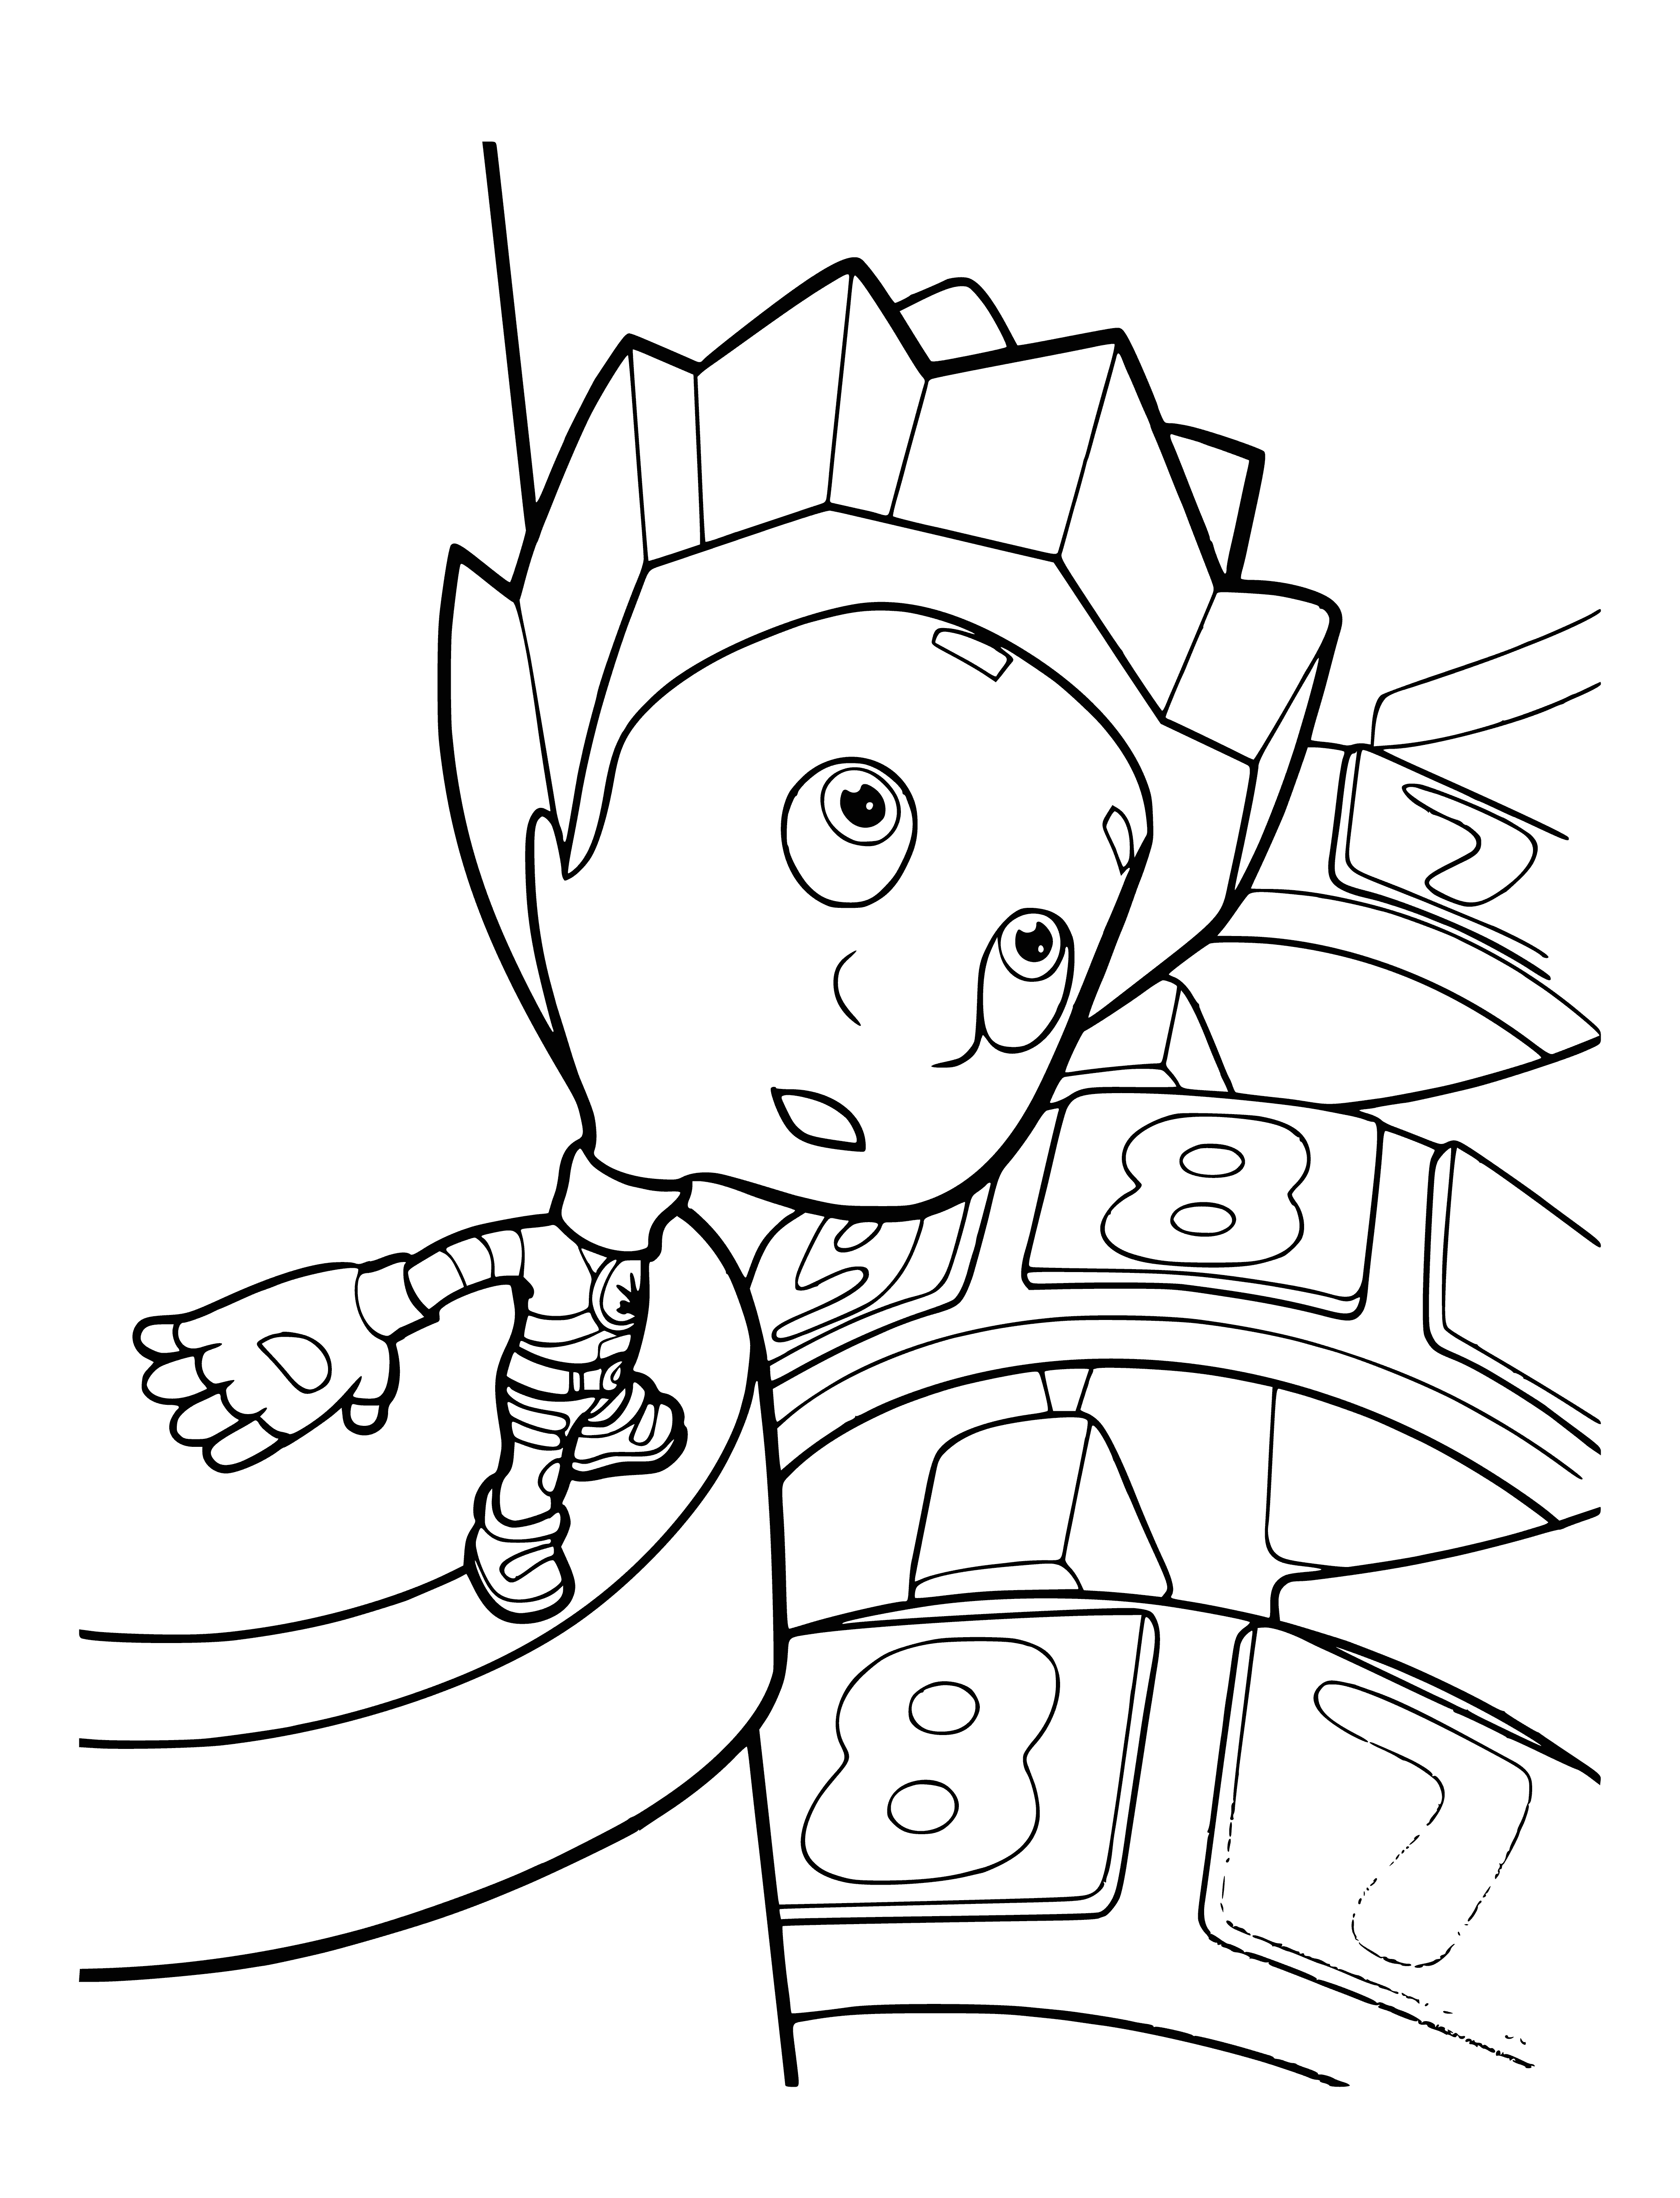 coloring page: Small orange robot w/blue eyes holds blue screwdriver in right hand, has big blue gear on back, 4 legs & 2 arms. #robots